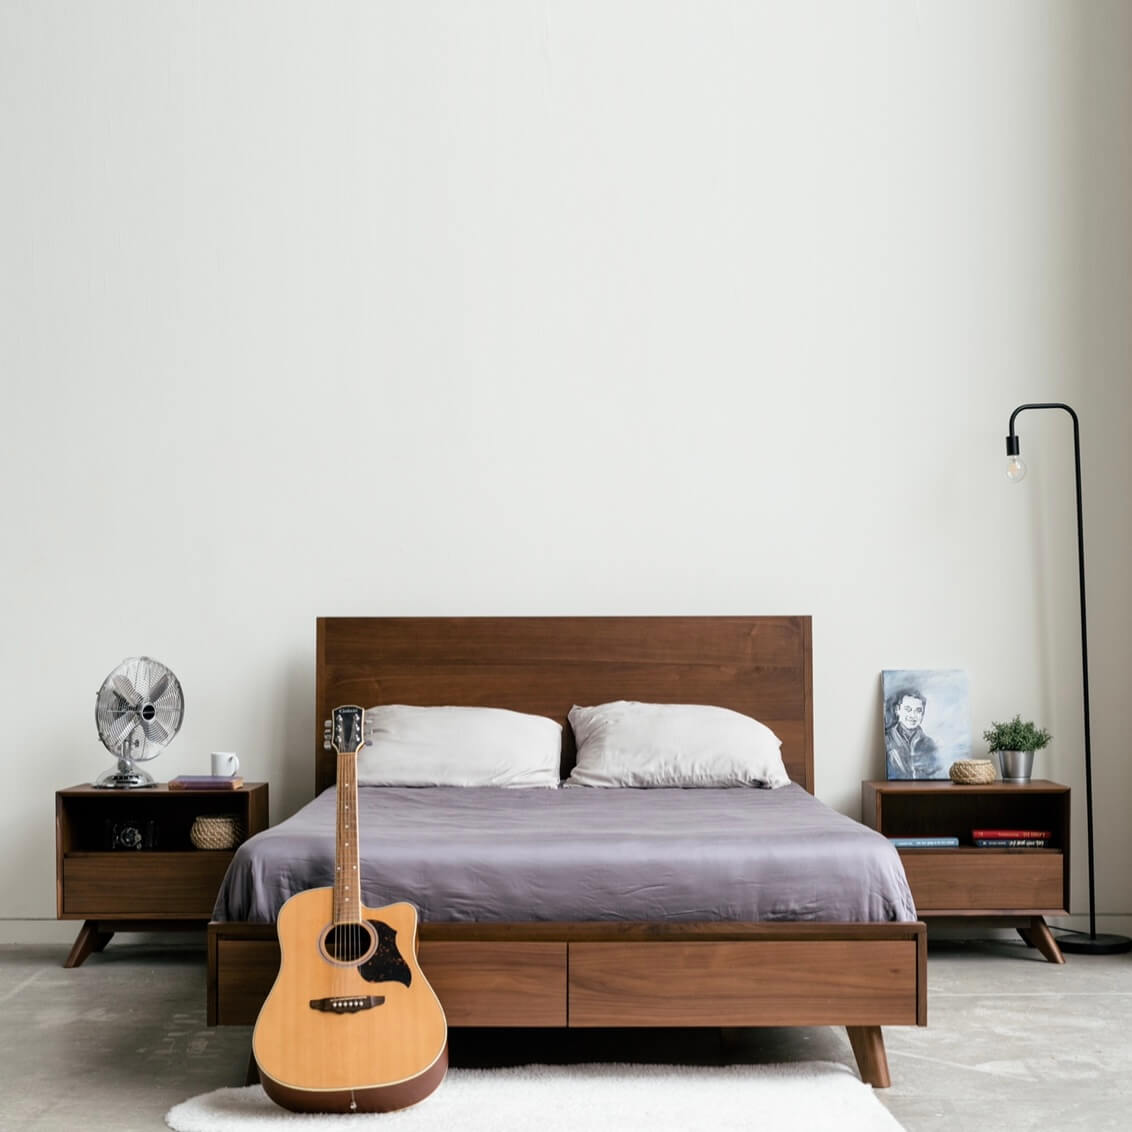 Mim Concept  best Modern furniture stores in Toronto, Ottawa and Mississauga to sell modern contemporary bedroom furniture and condo furniture. Minimal mid century modern bed Low profile platform storage bed solid walnut wood modern organic